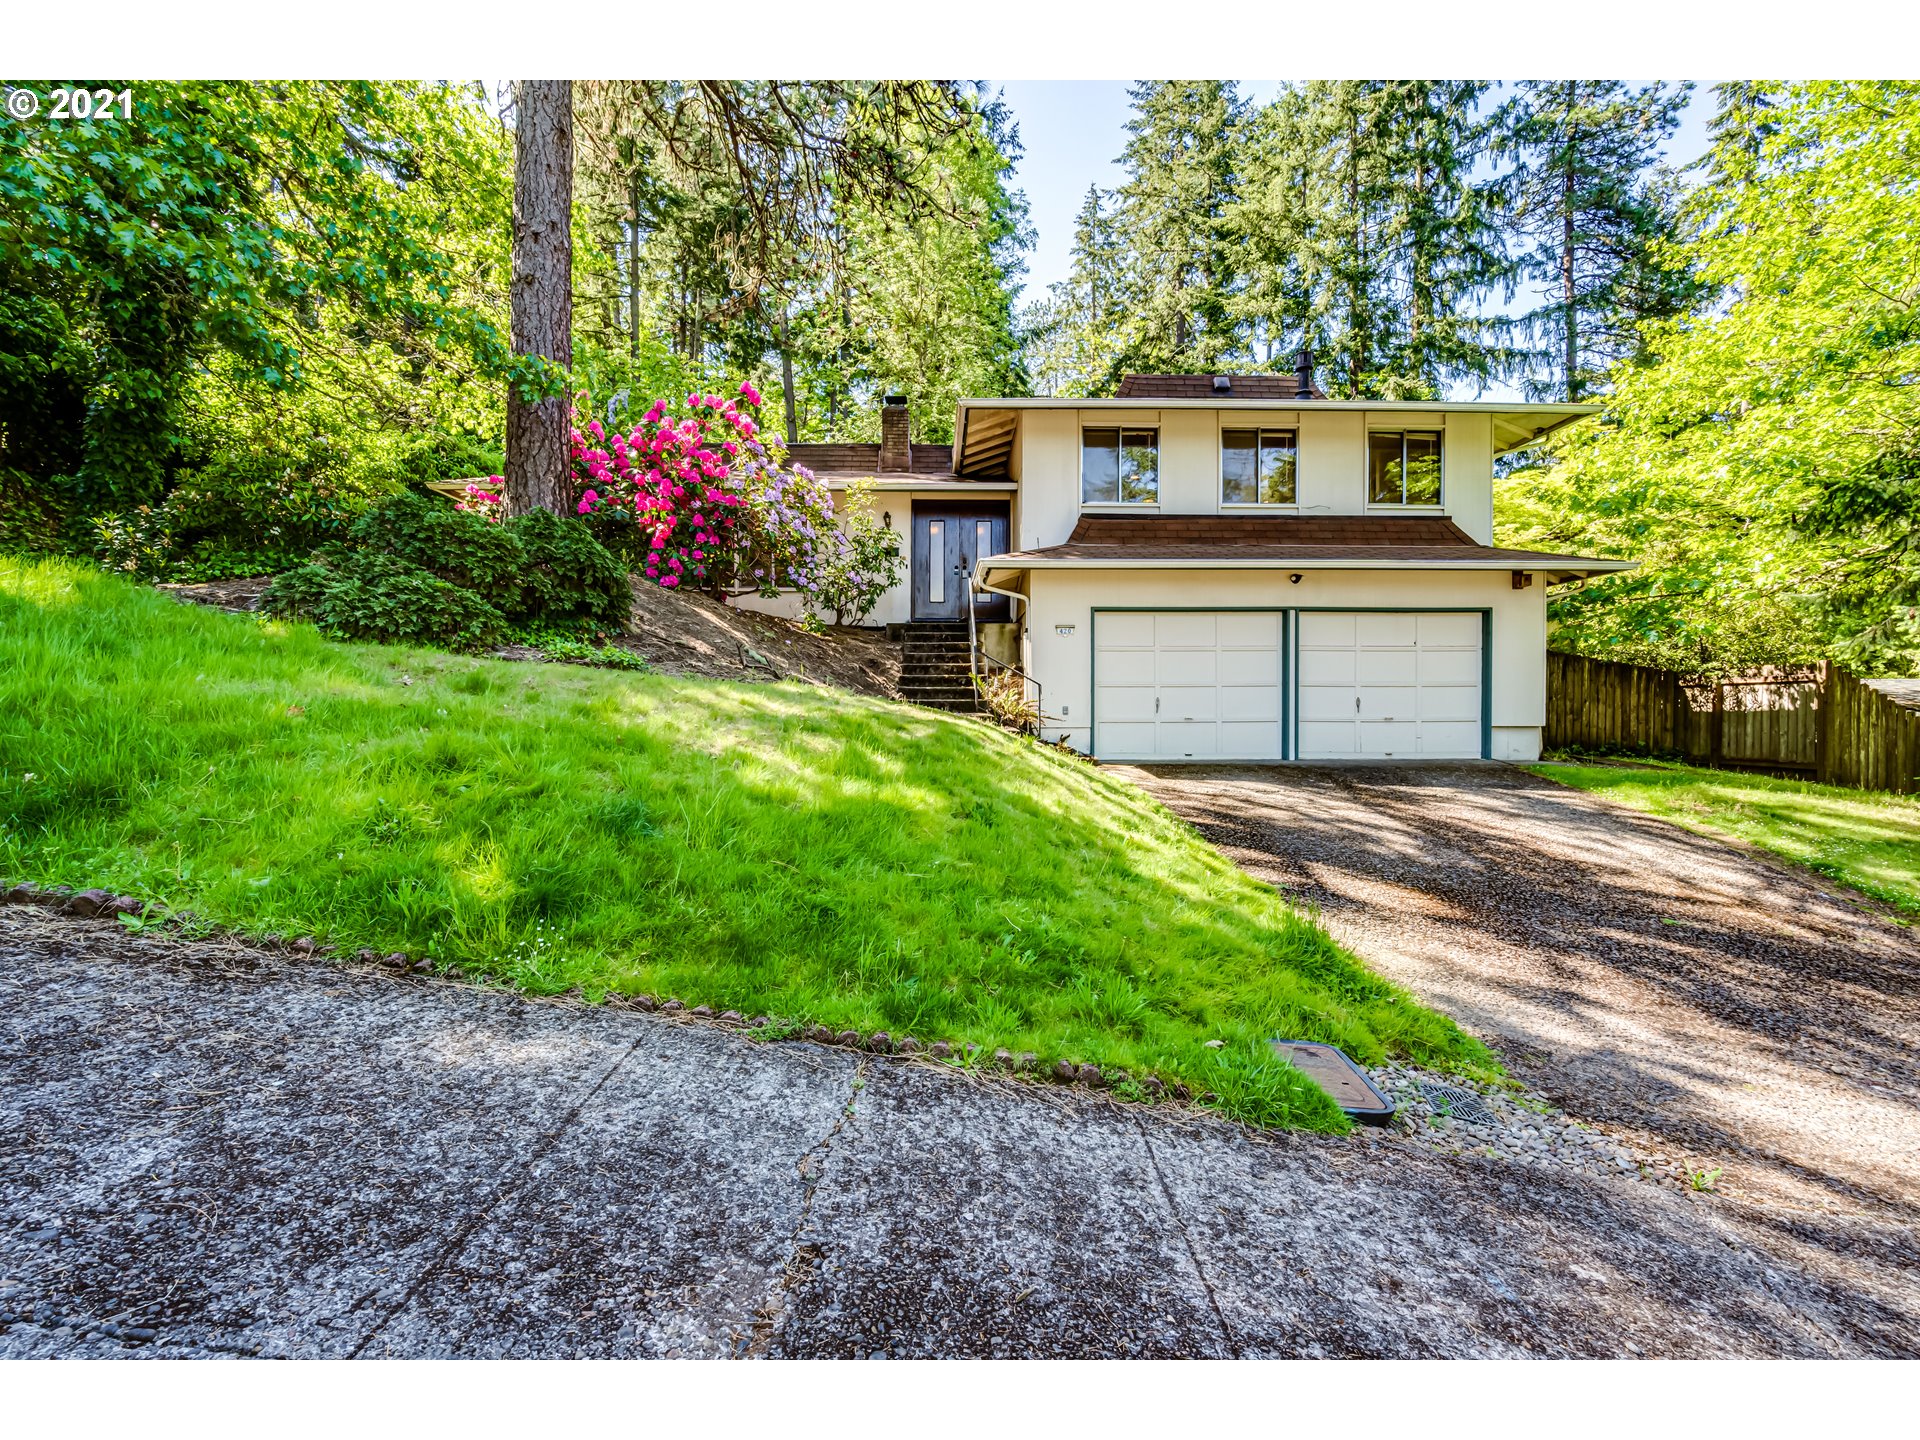 420 E 53RD AVE (1 of 32)